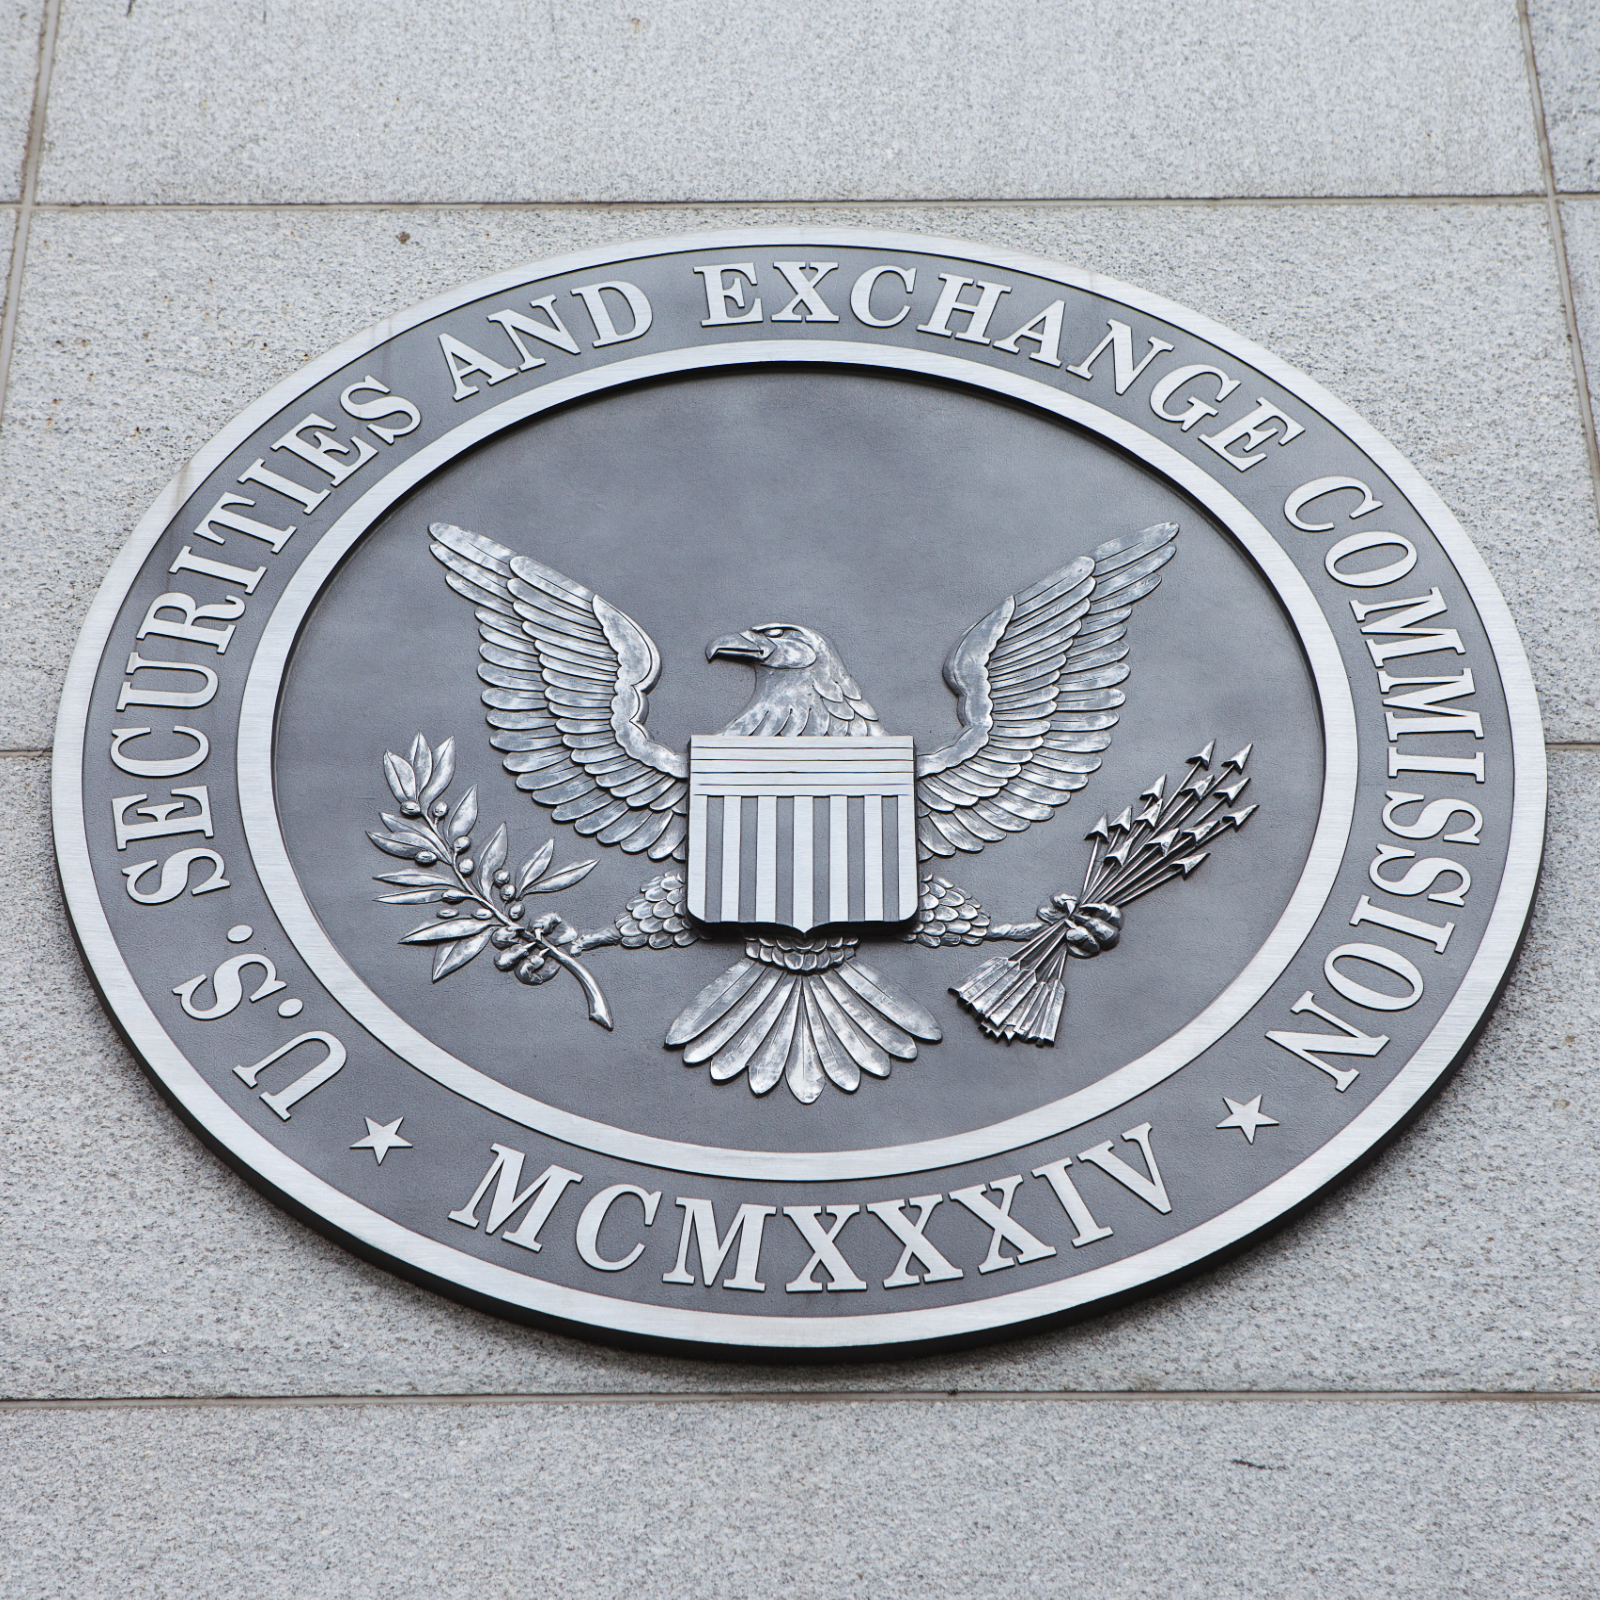 SEC Filing for Vaneck Solidx Bitcoin ETF Withdrawn